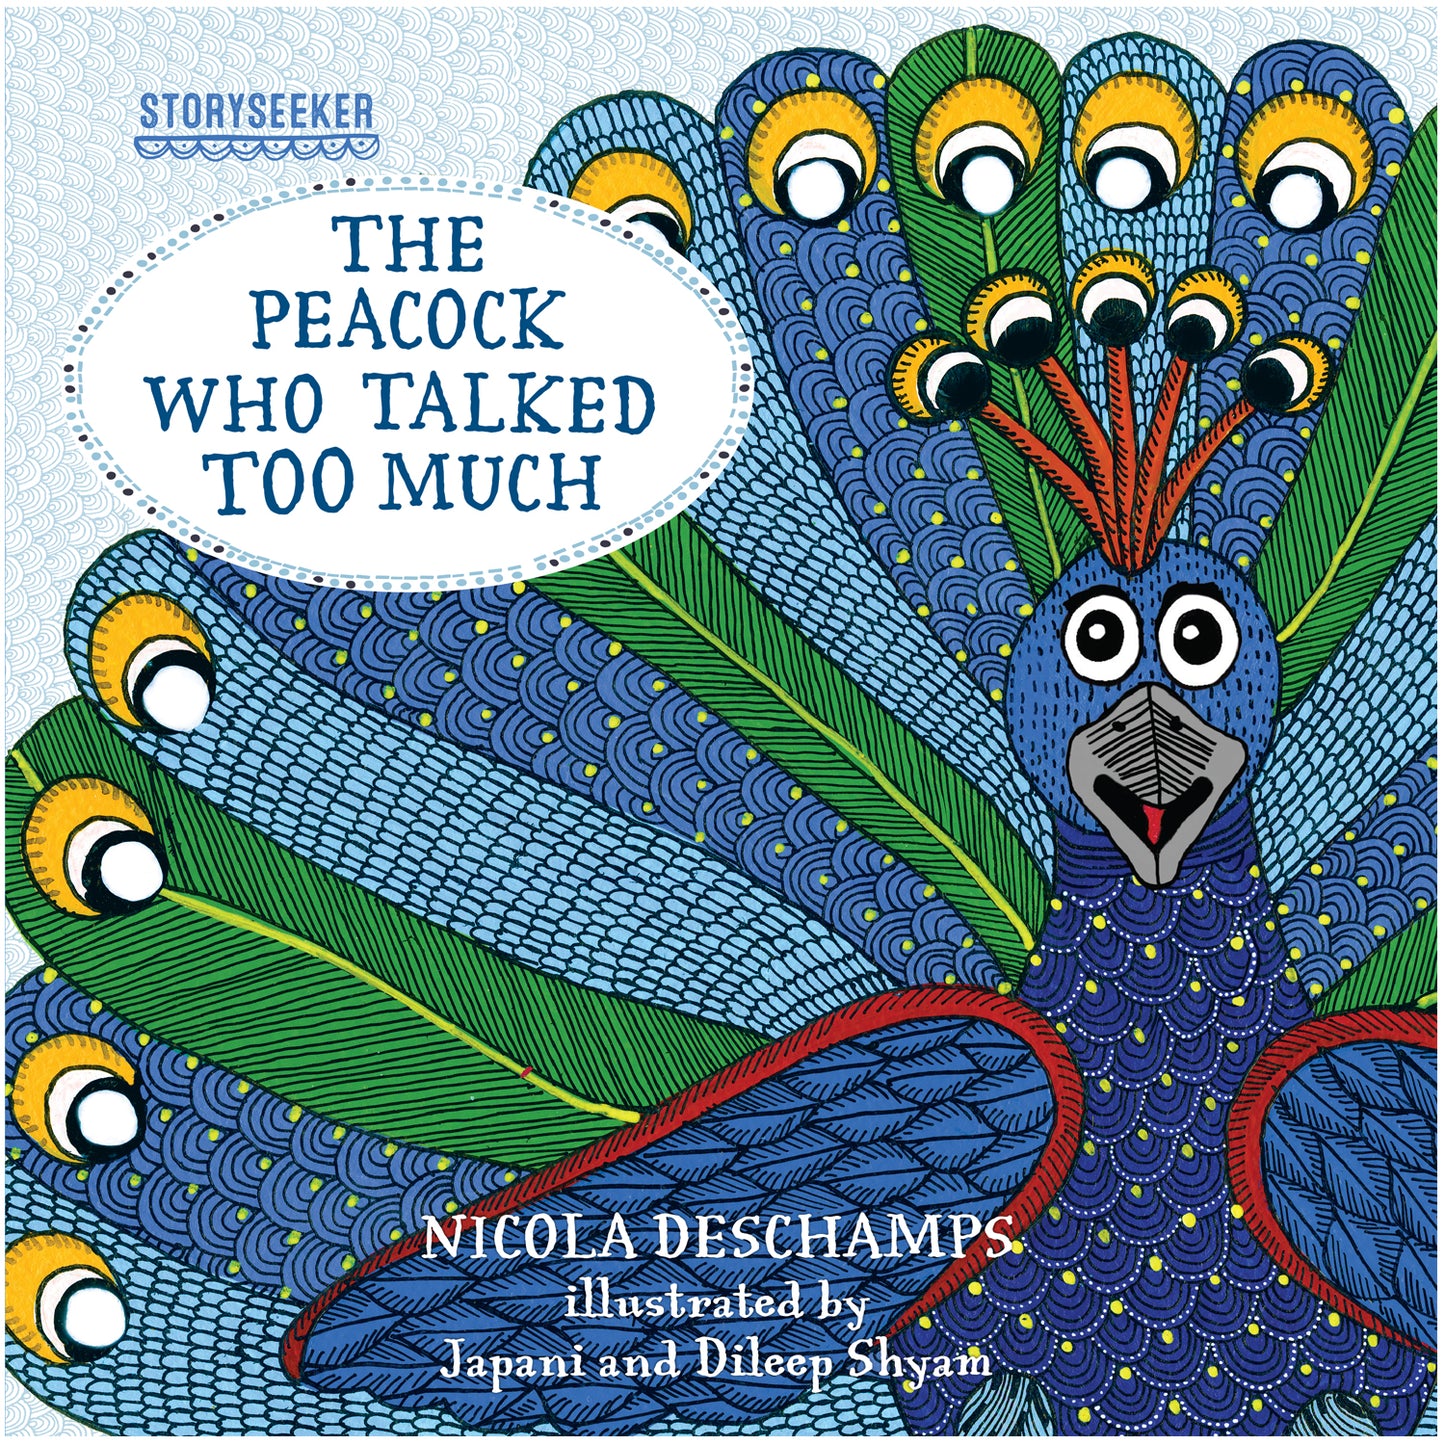 The Peacock who talked too much | Storyseeker | Toran Press | Picture Book | Gond tribal art | Children's Storybook | Books for kids